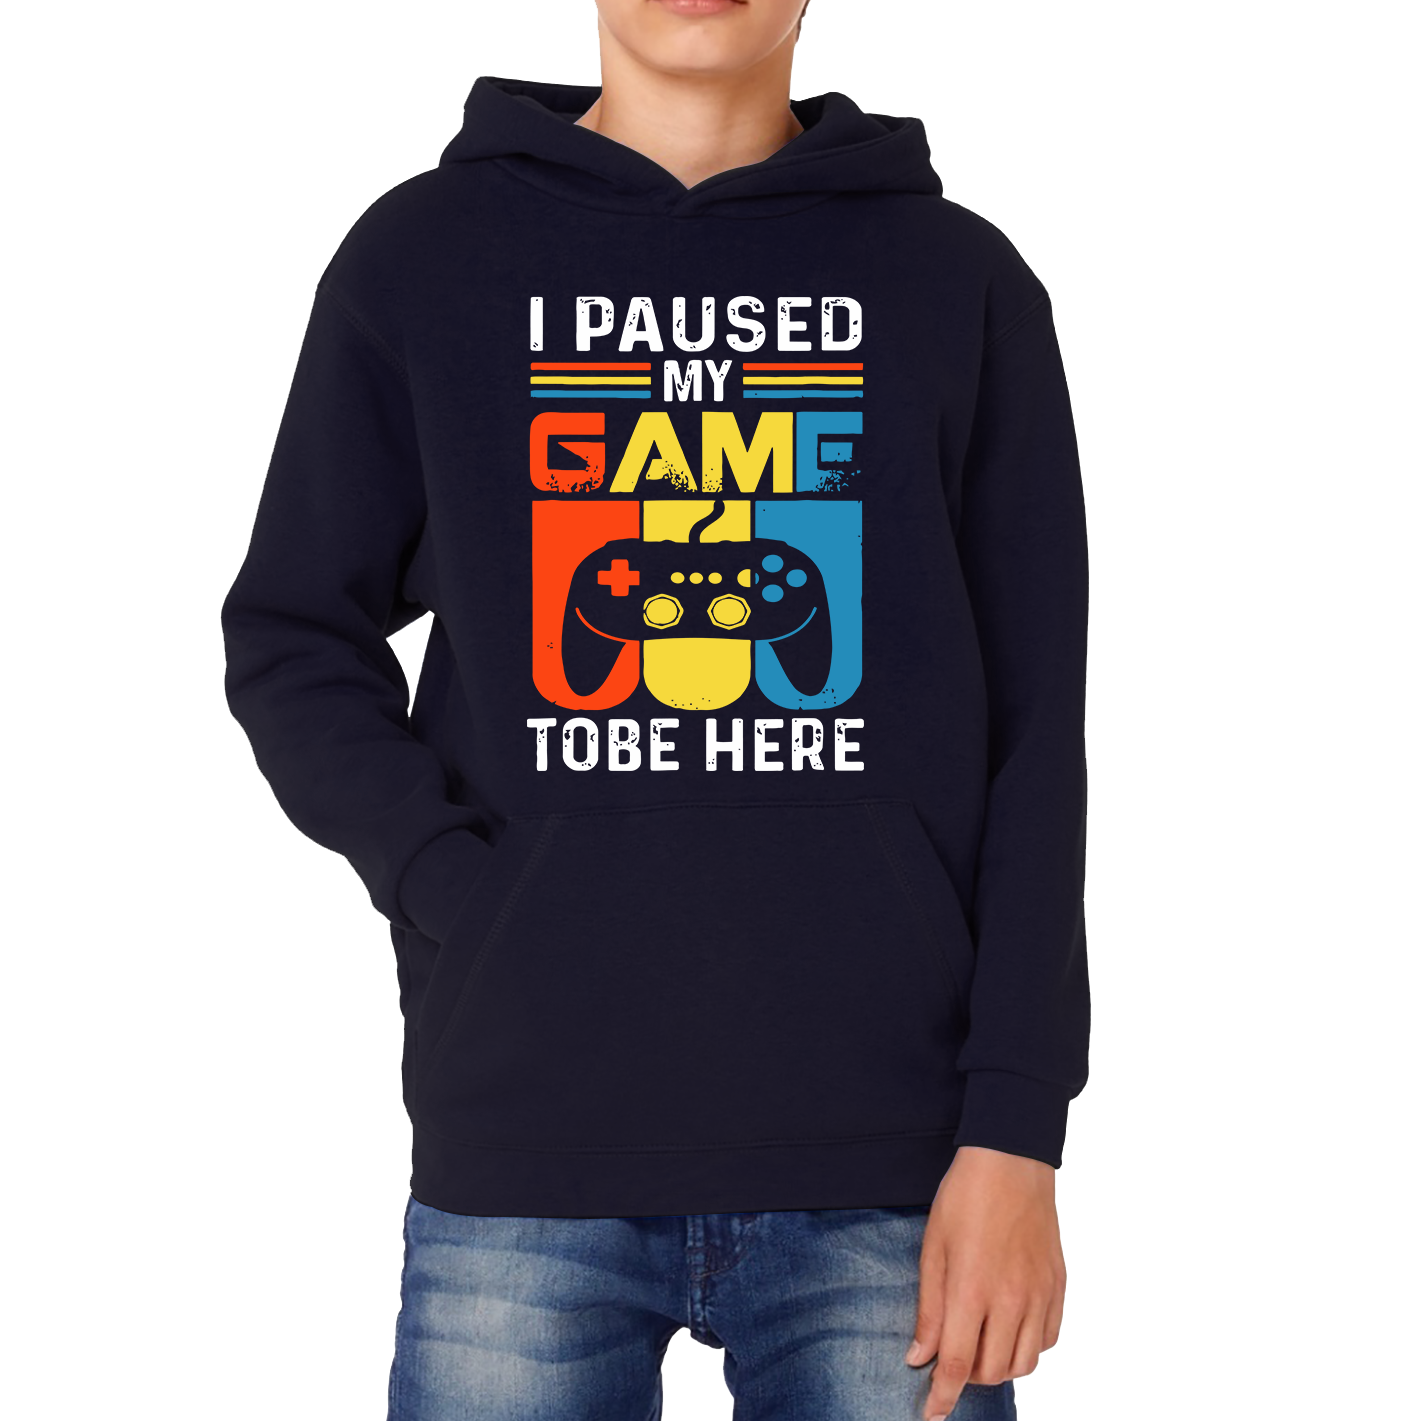 I Paused My Game To Be Here Funny Novelty Sarcastic Video Game Kids Hoodie